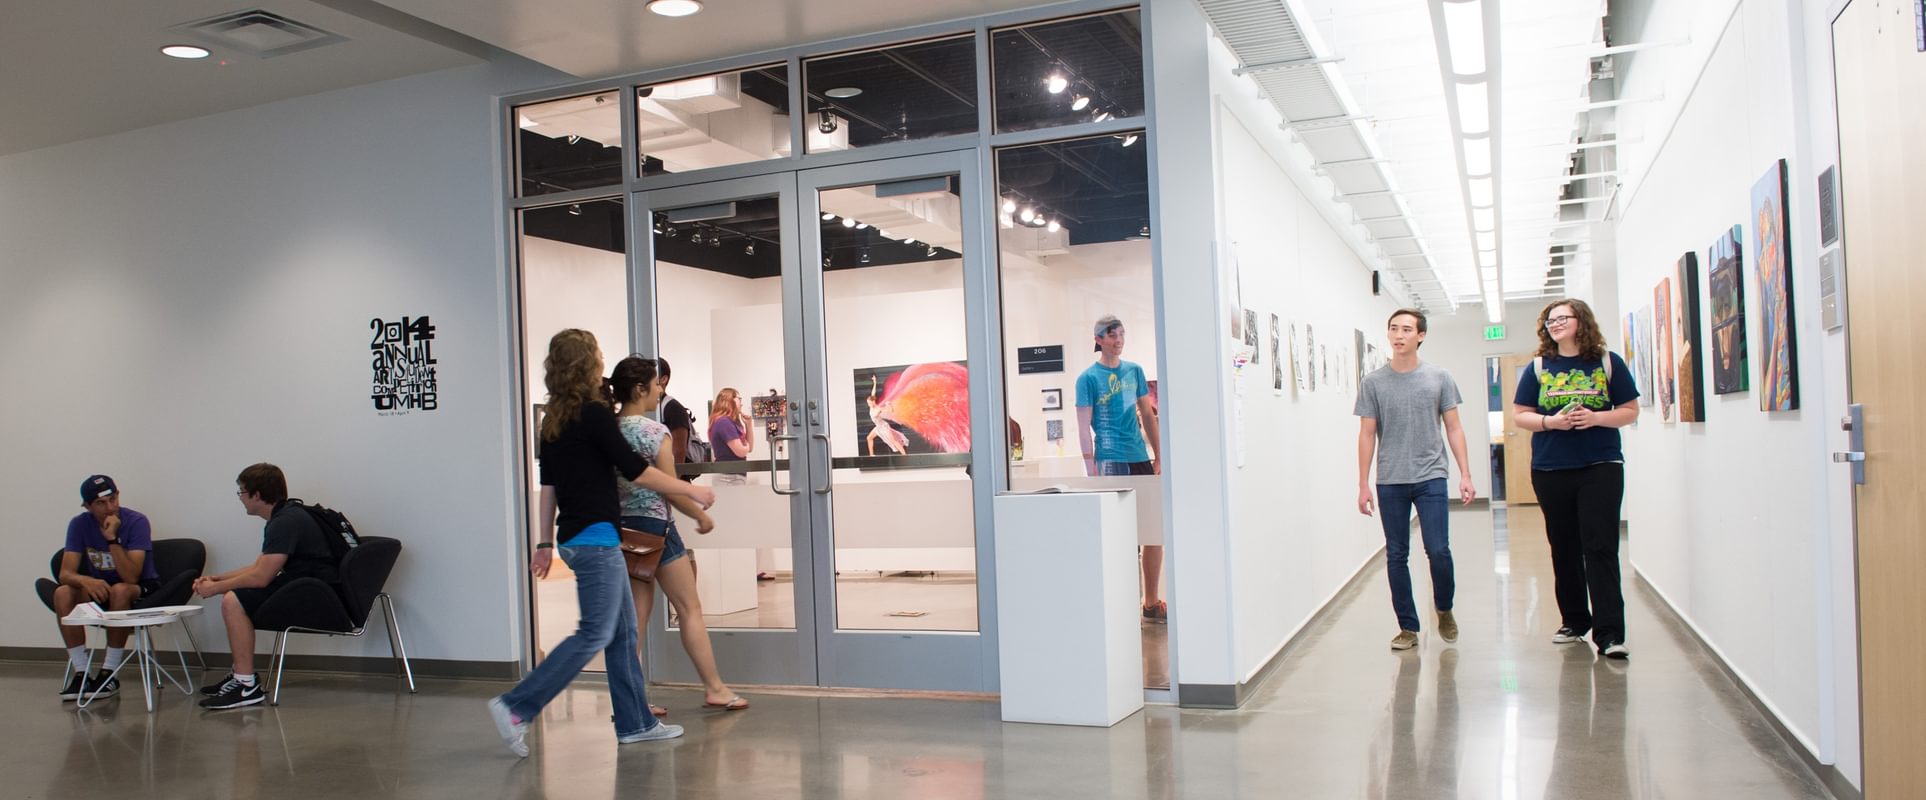 Instructors Share Work in Art Faculty Exhibition